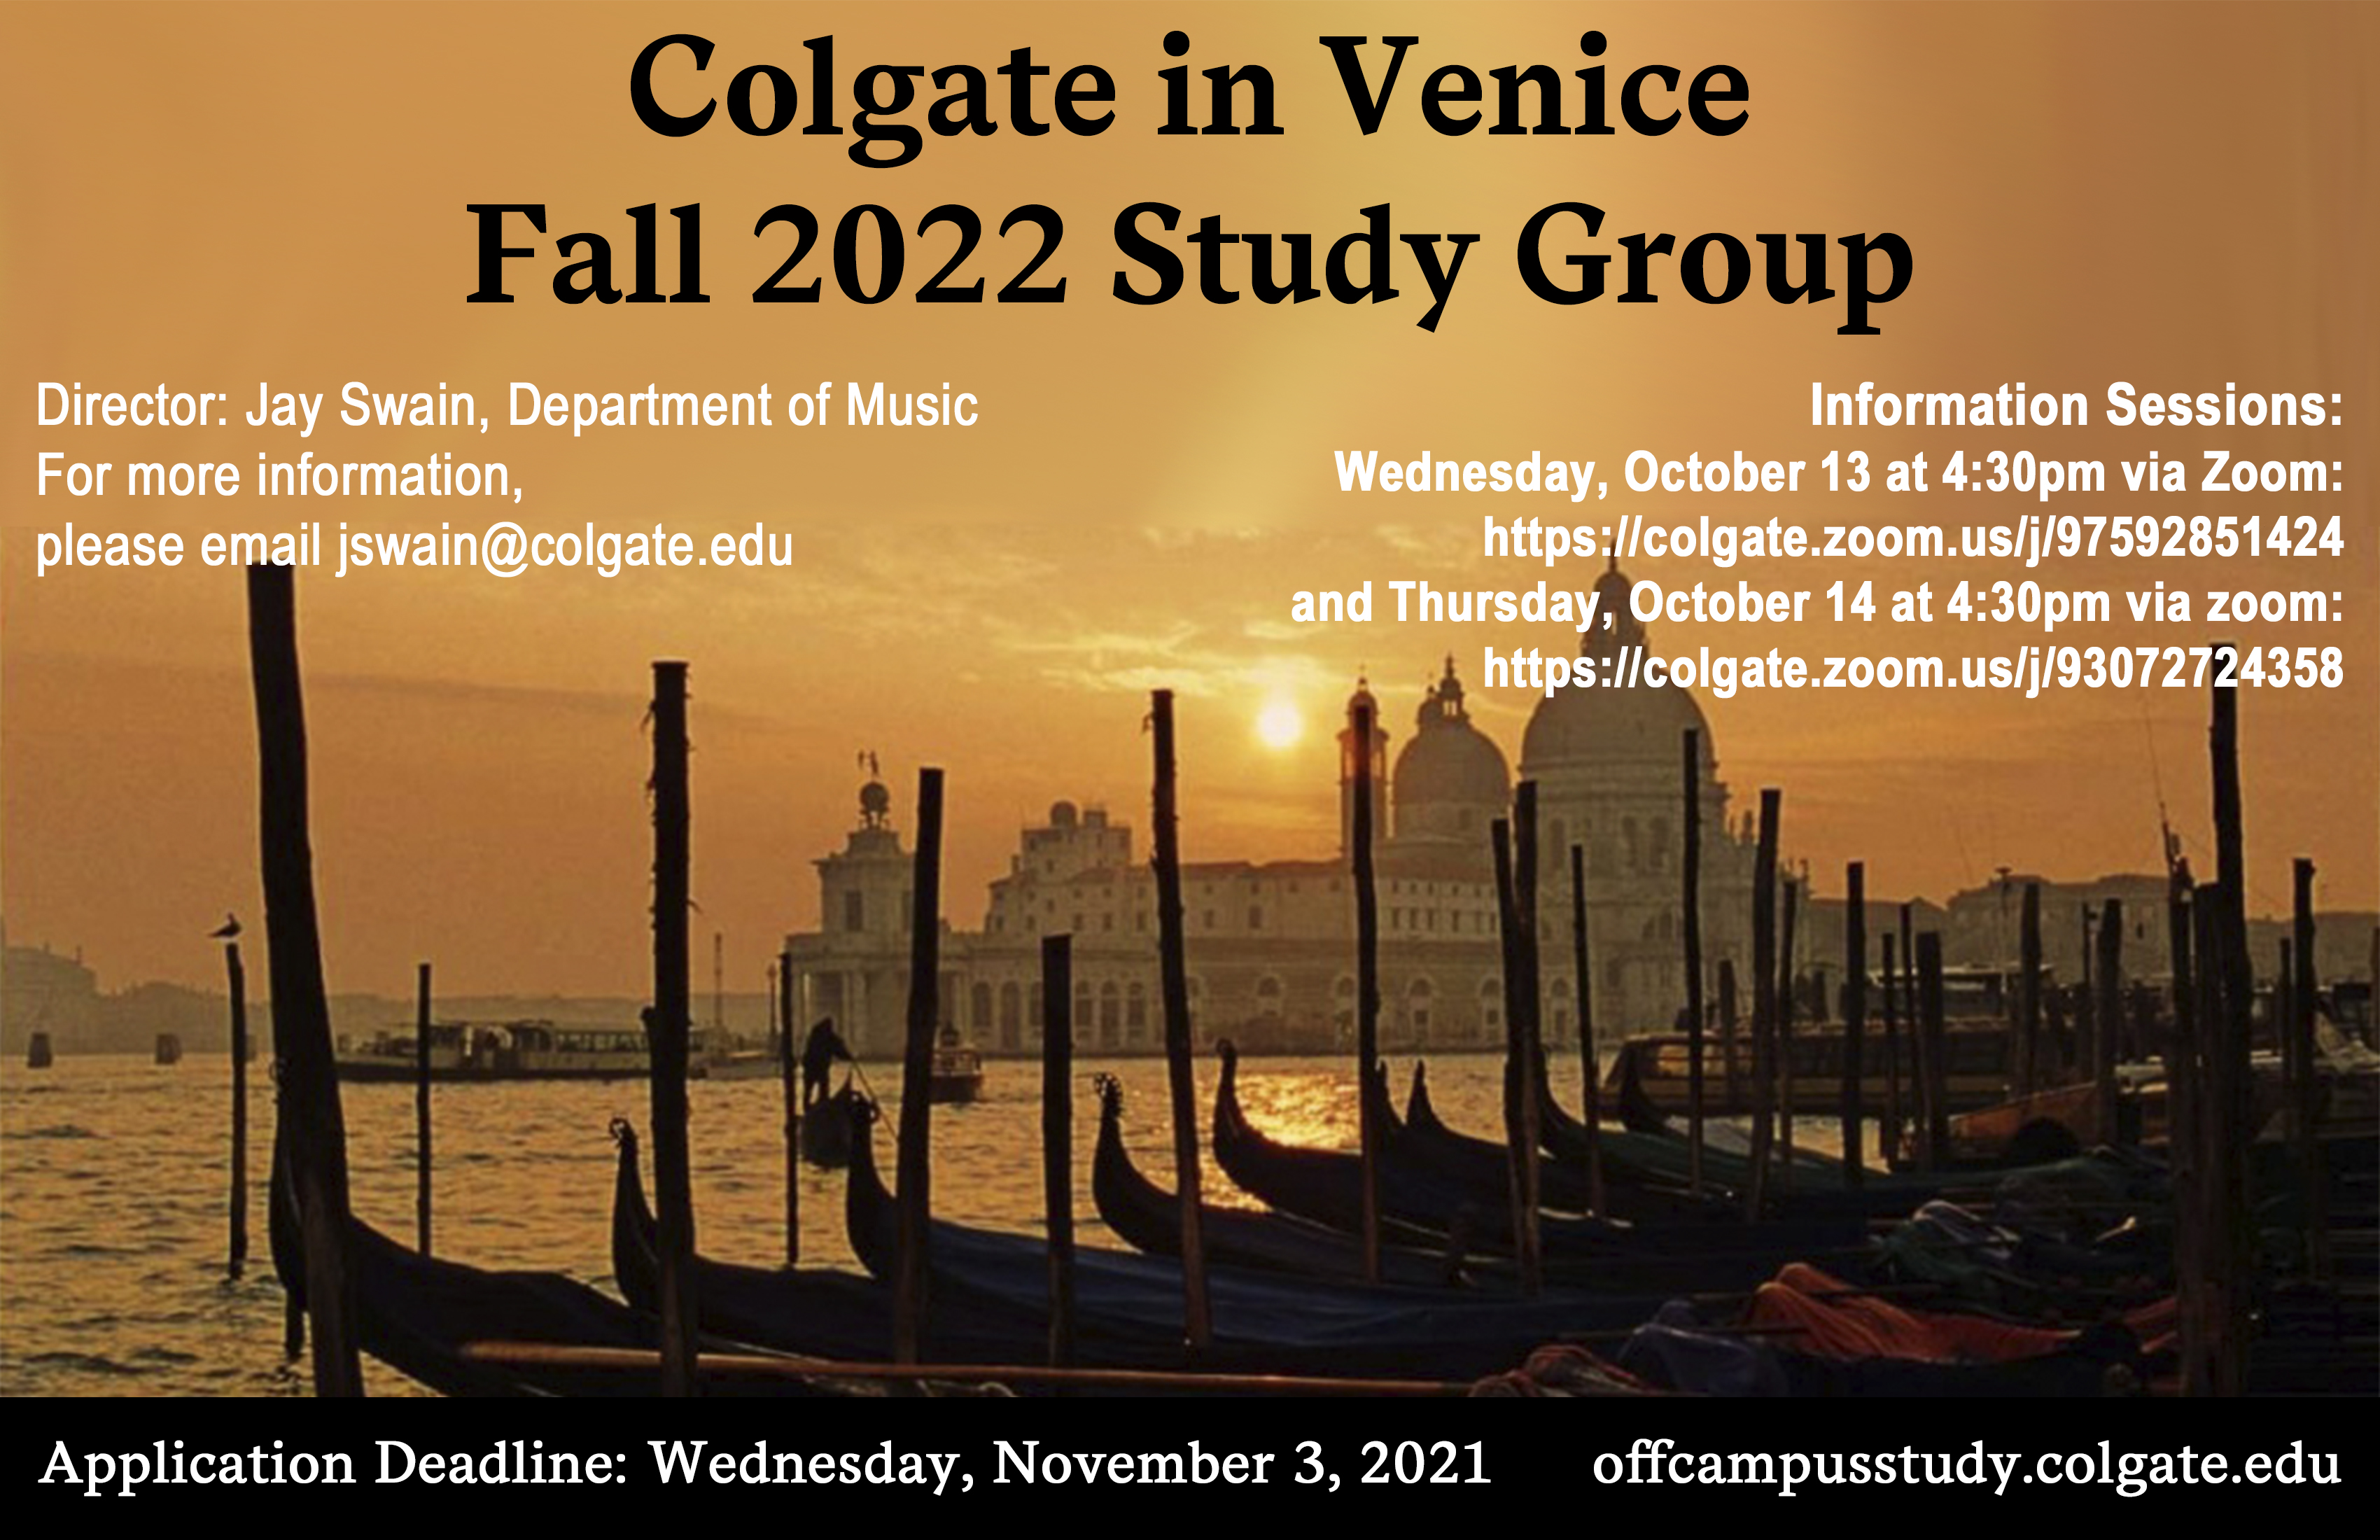 Fall 2022 Venice study group poster